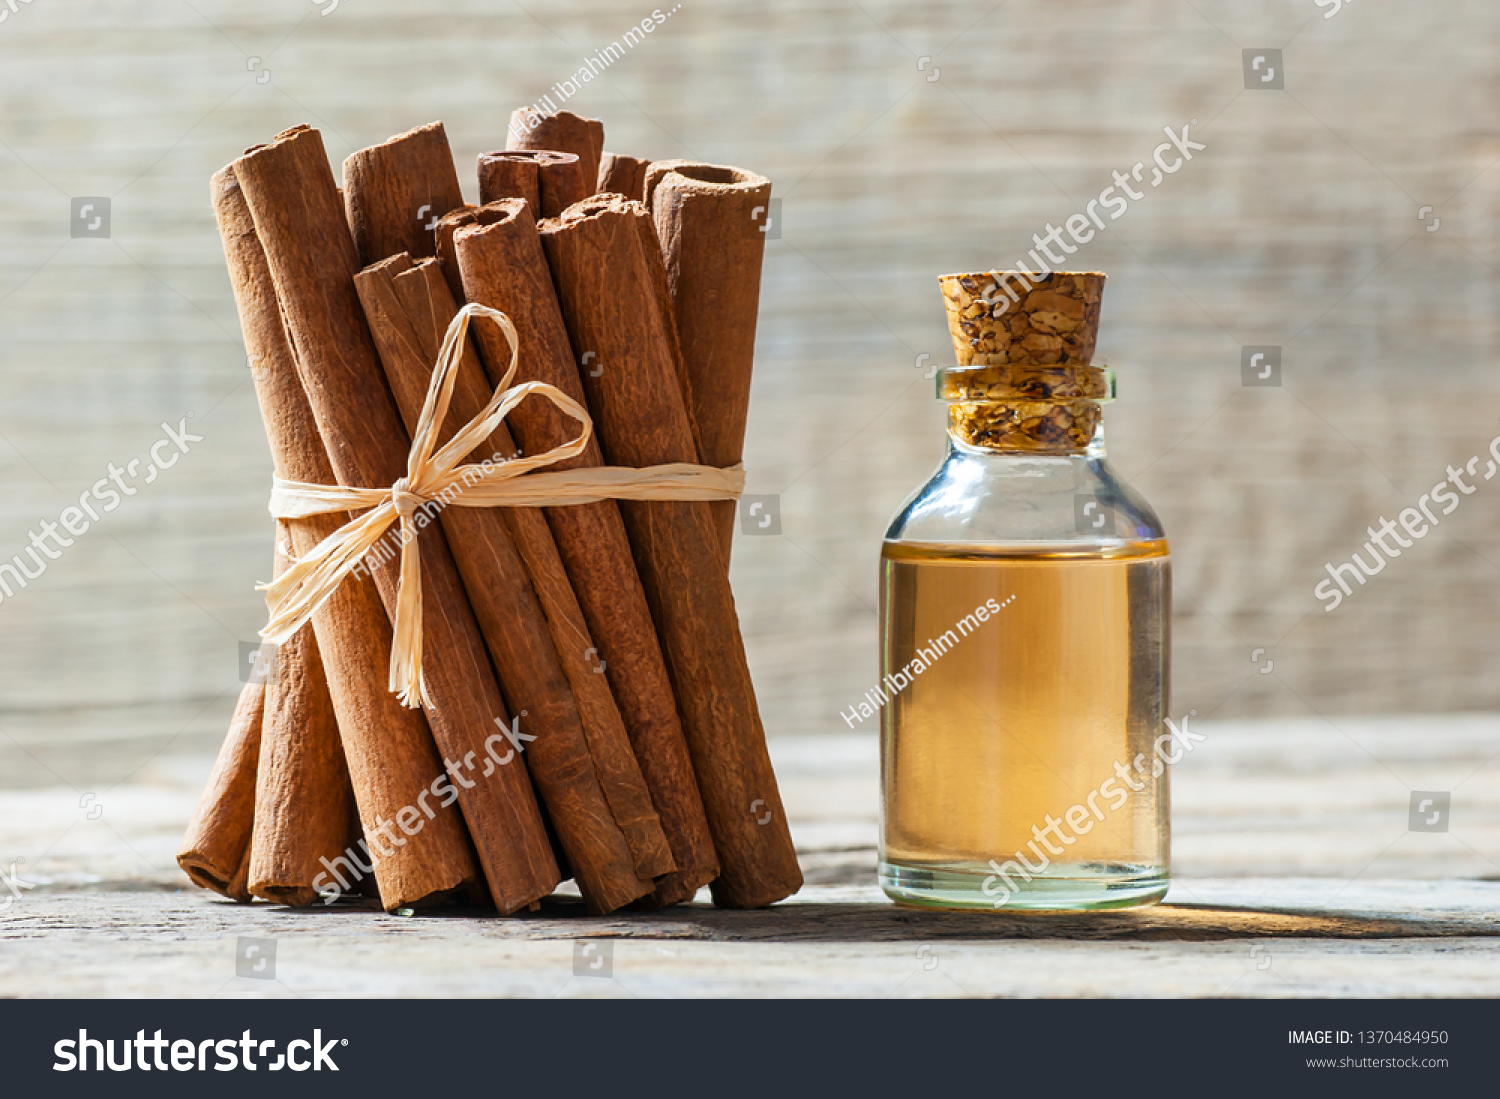 Close up bottle of cinnamon oil with cinnamon sticks and cinnamon powder on wooden background, healthy spice concept Cinnamomum verum
 #1370484950